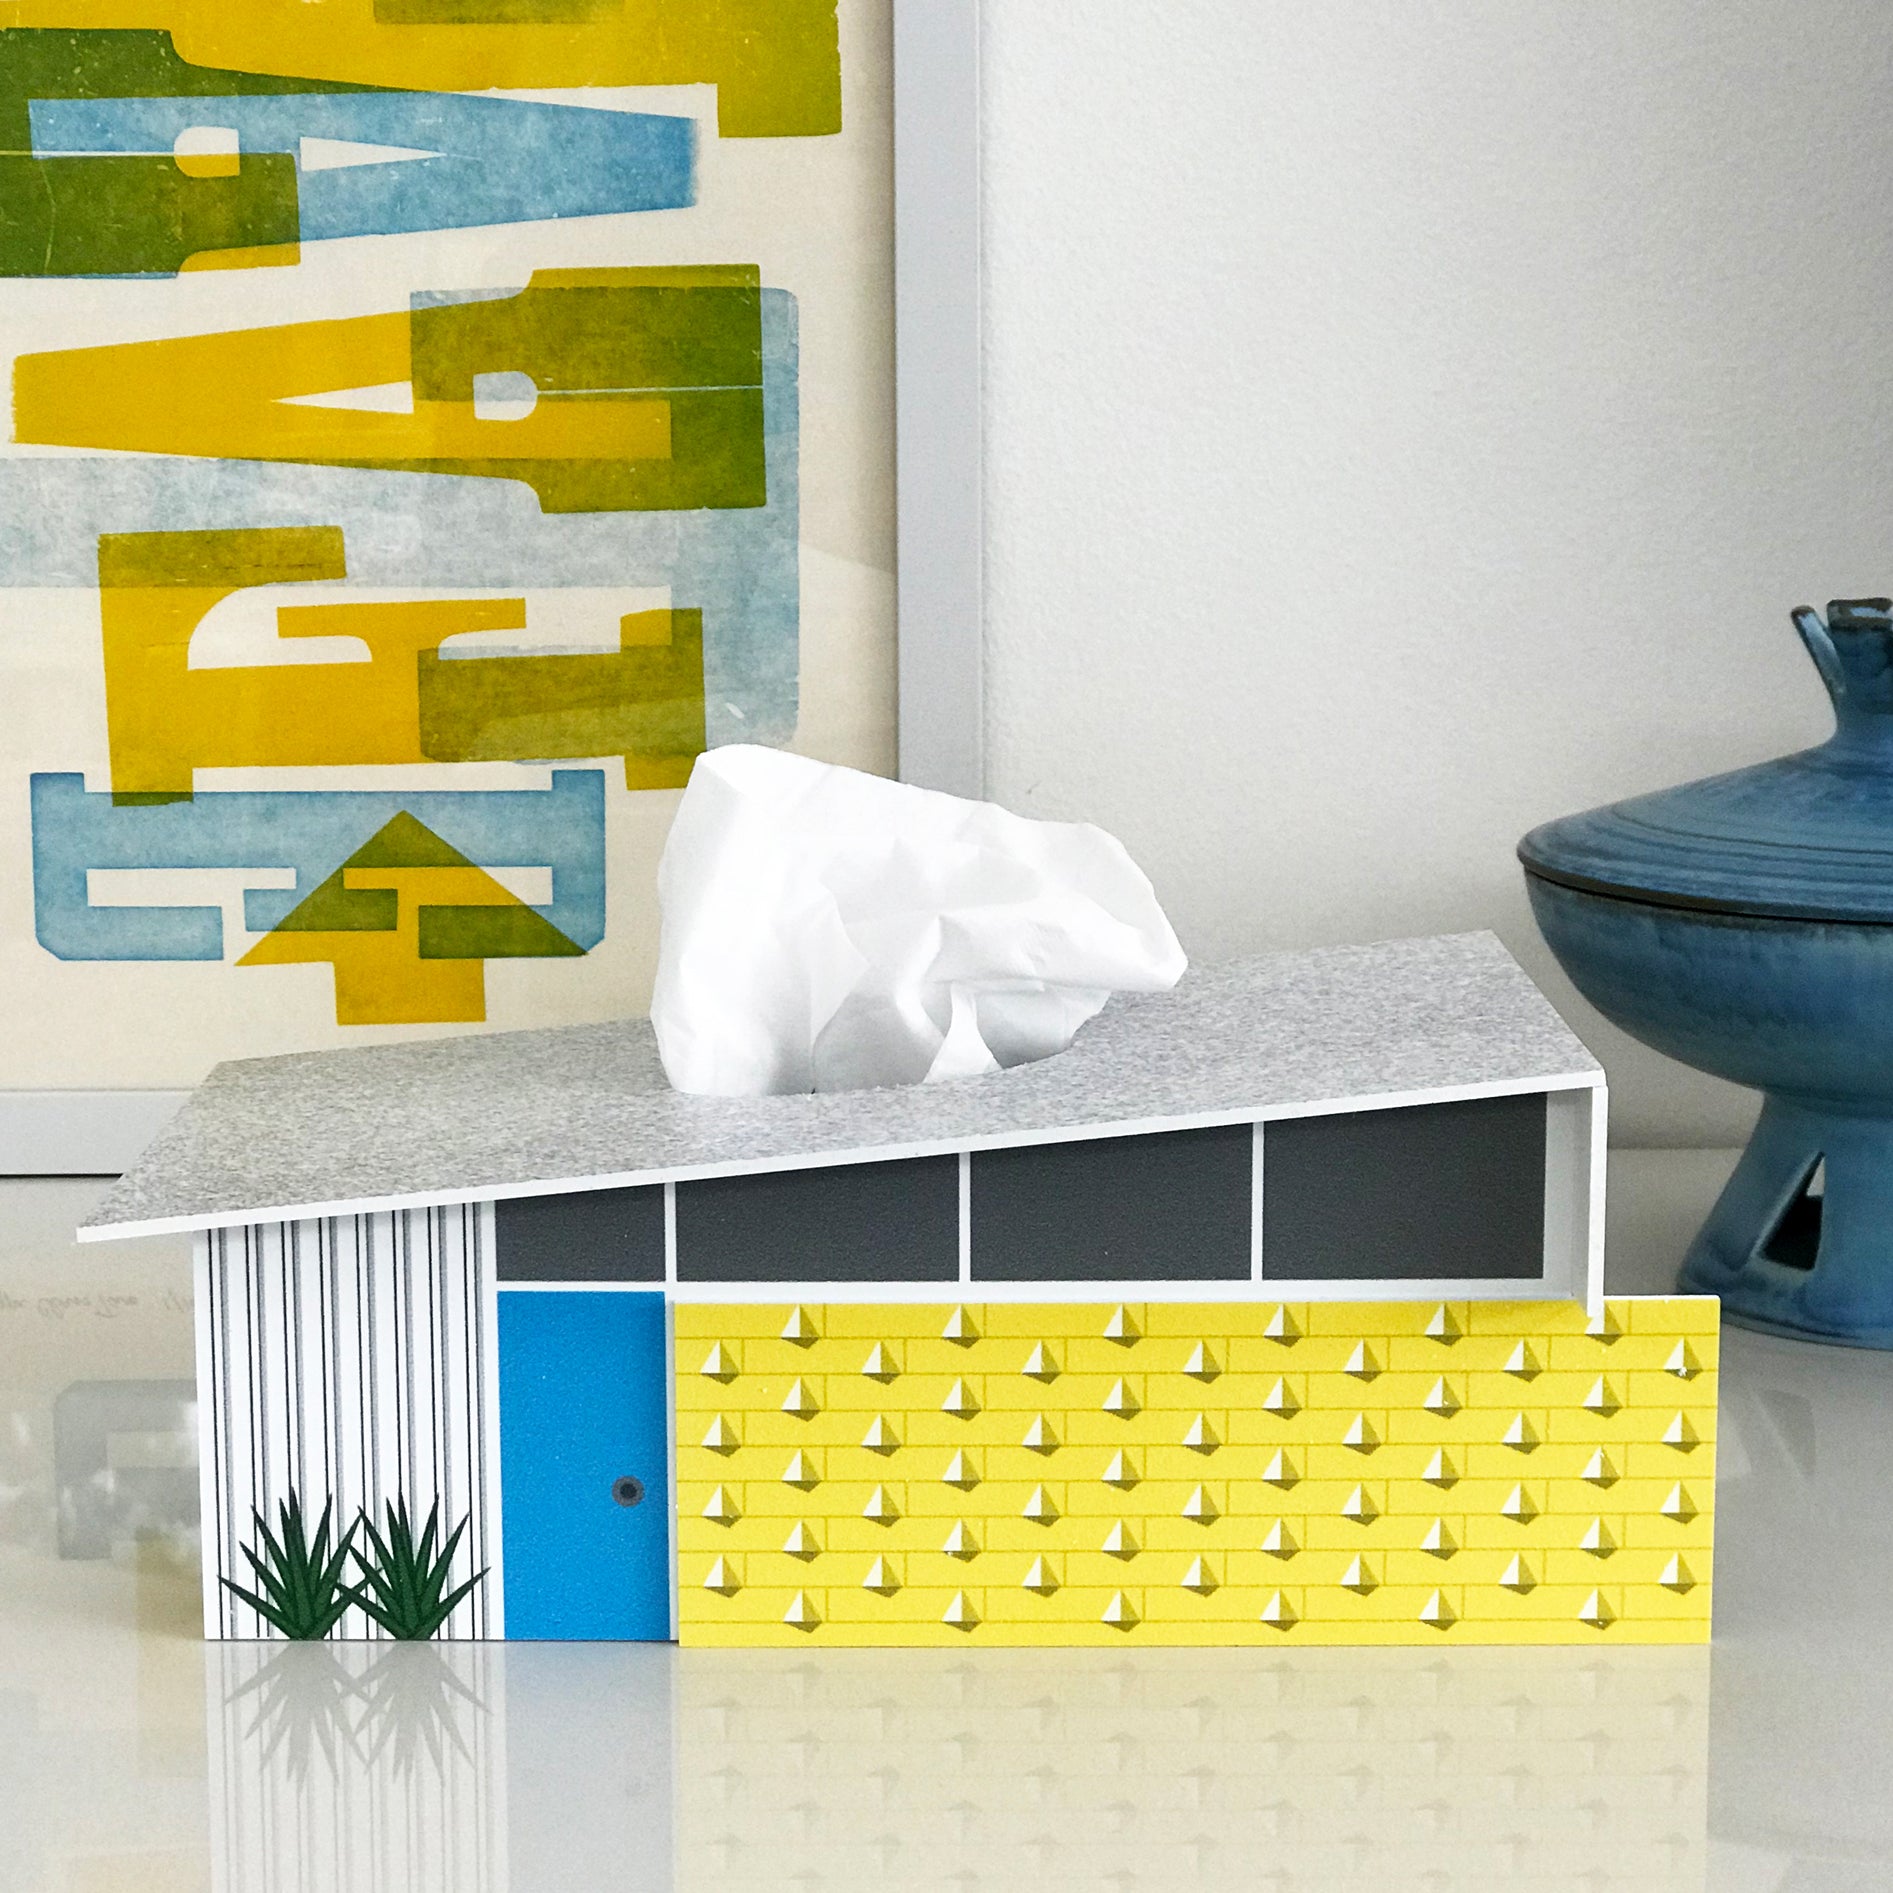 A midcentury modern tissue box on top of a sleek tabletop with vibrant art in the background.